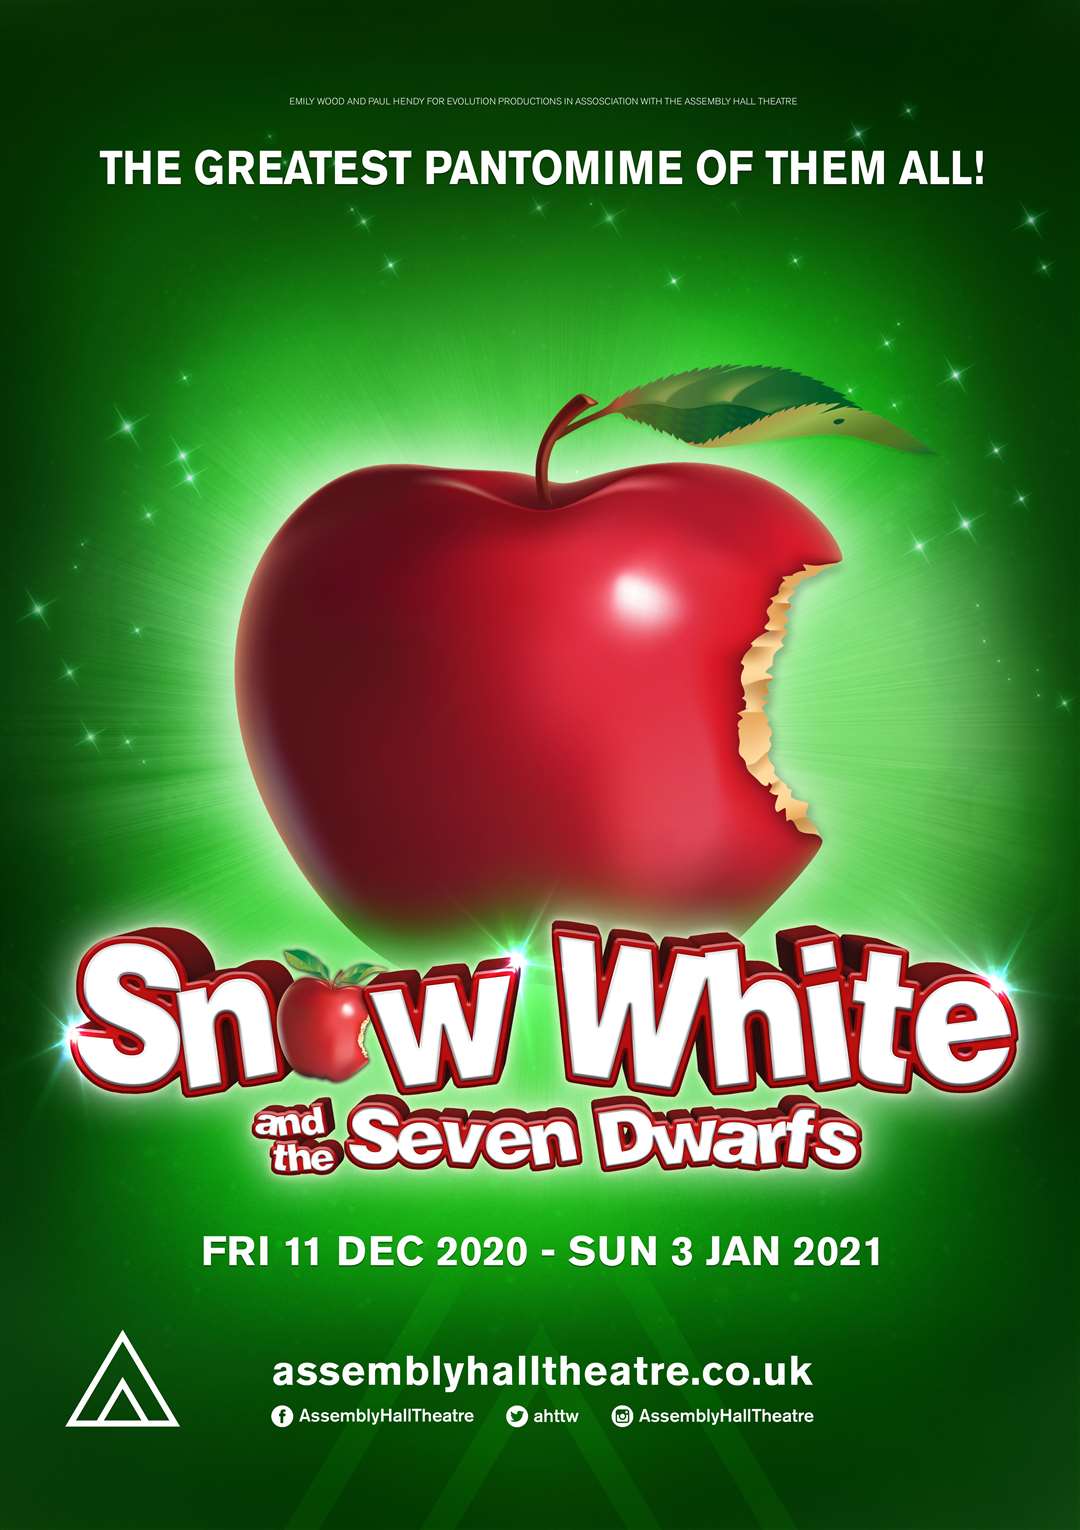 Snow White was set to open in December